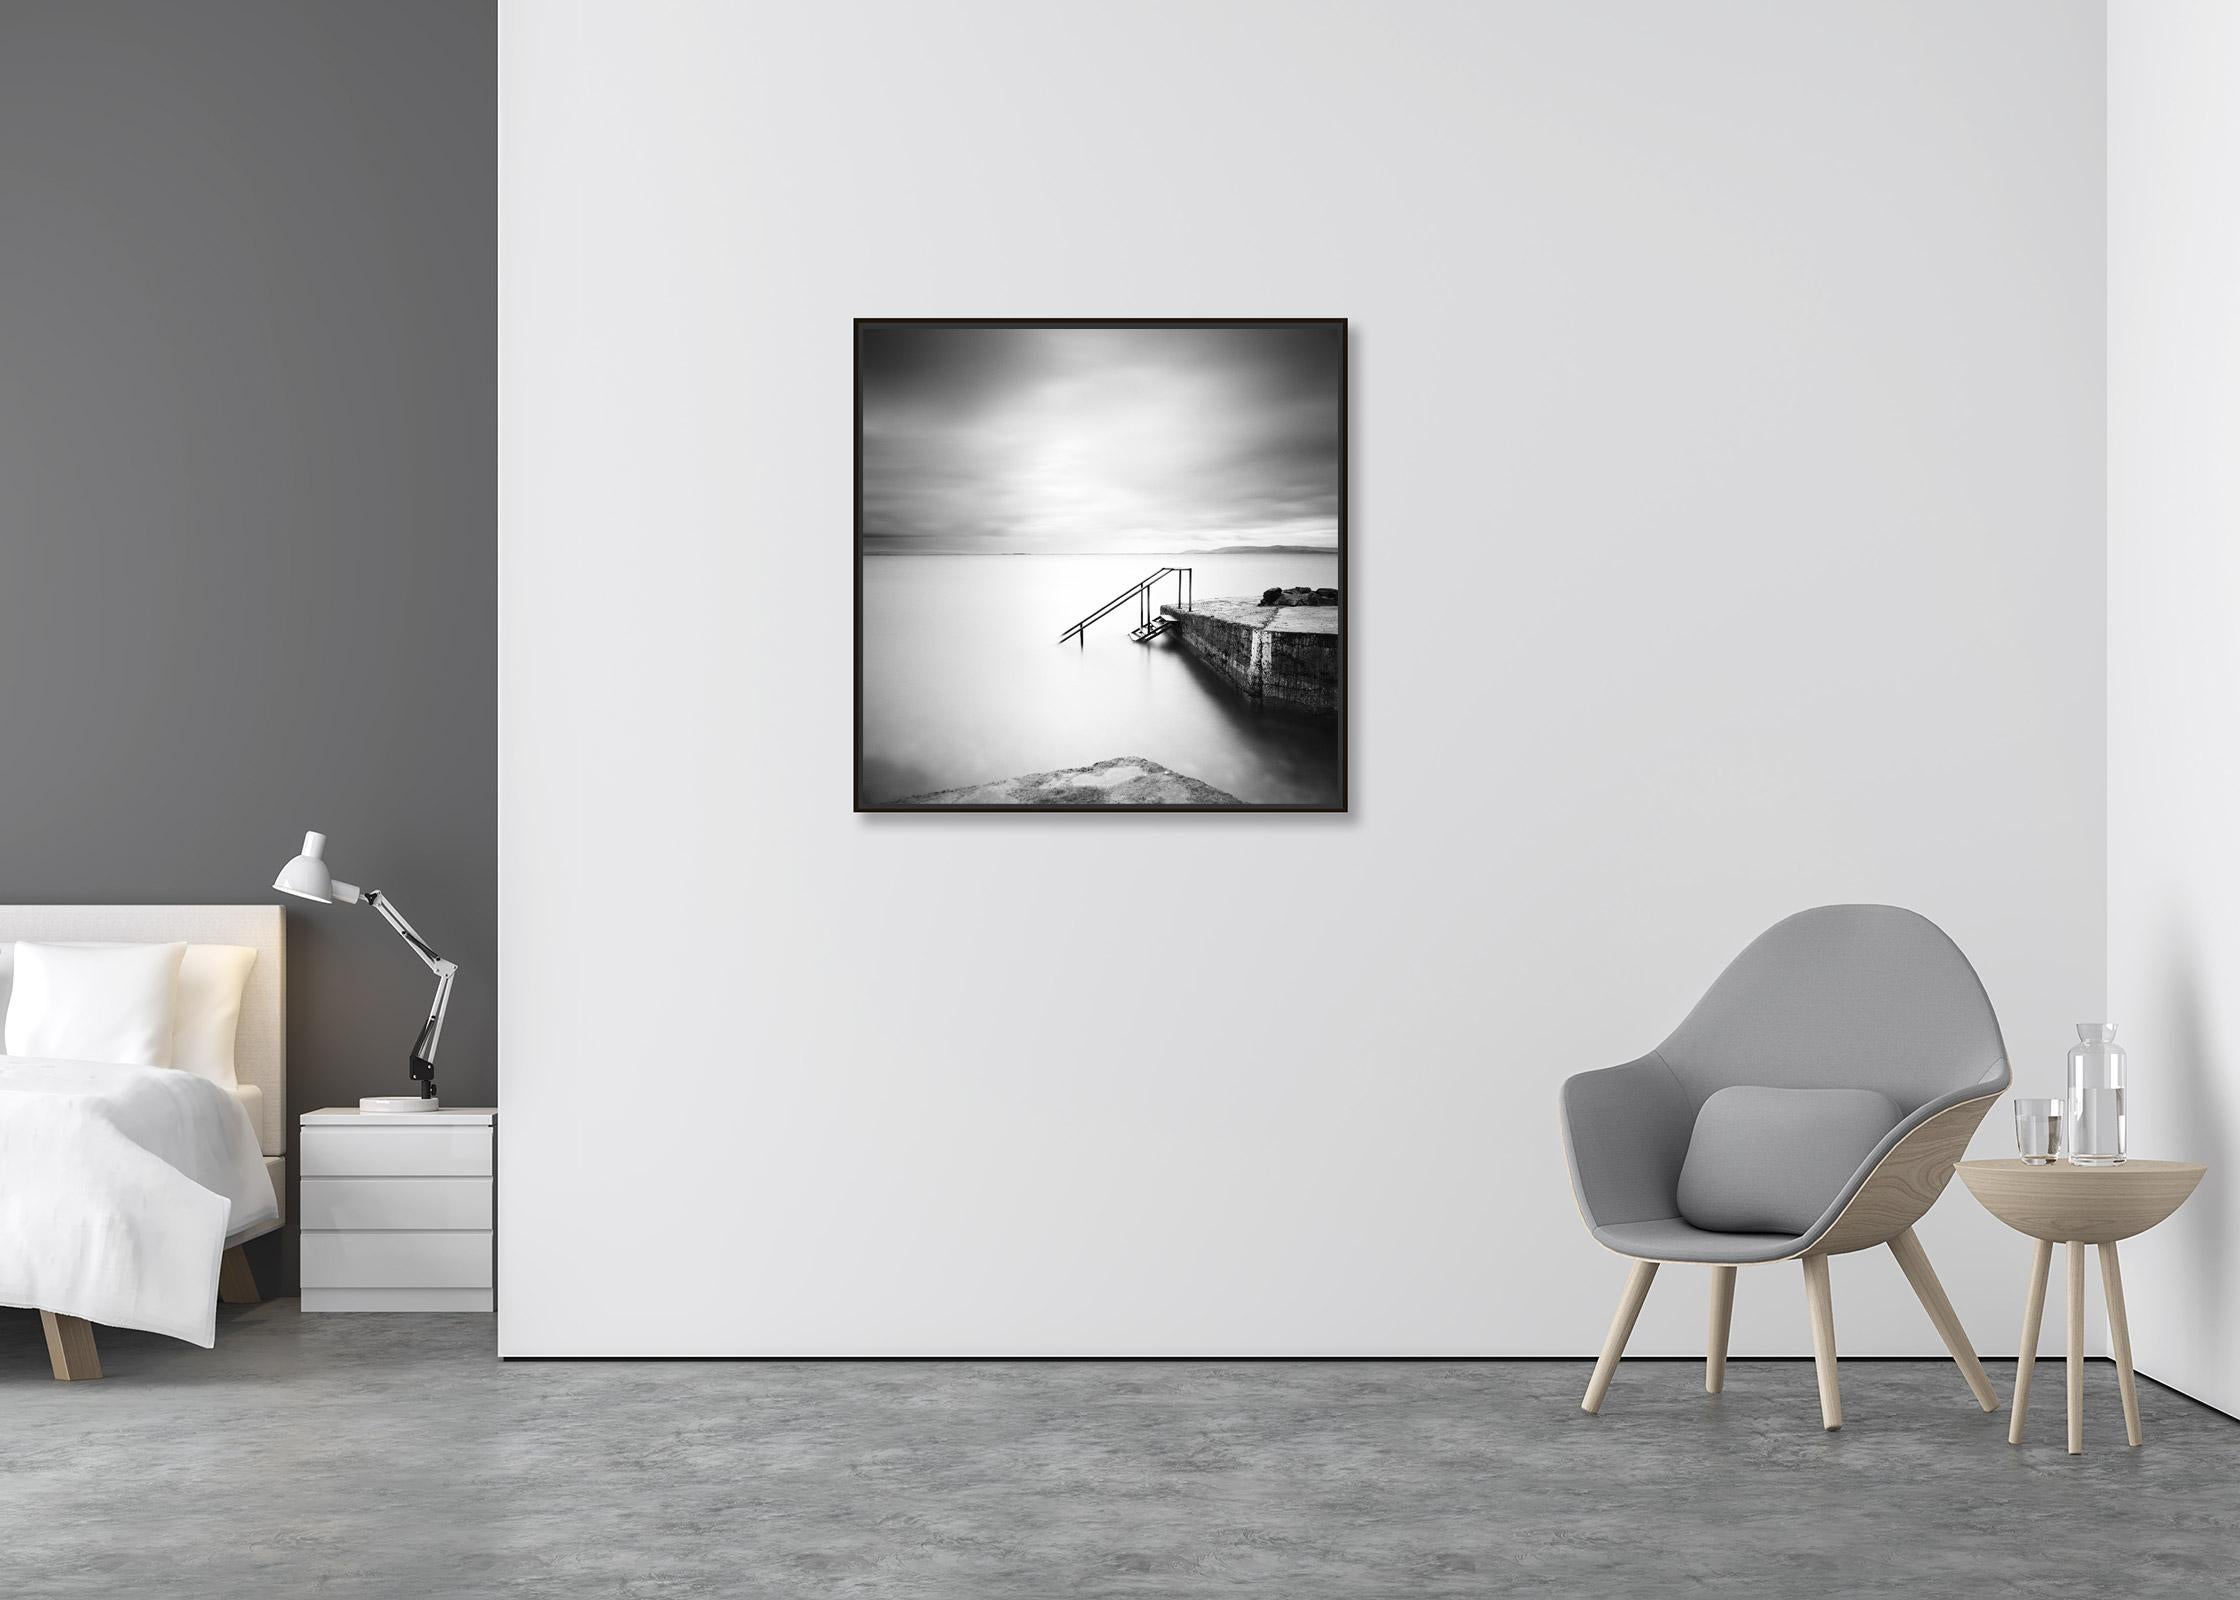 Four Steps Down, Ireland, minimalist black and white photography, landscape - Contemporary Photograph by Gerald Berghammer